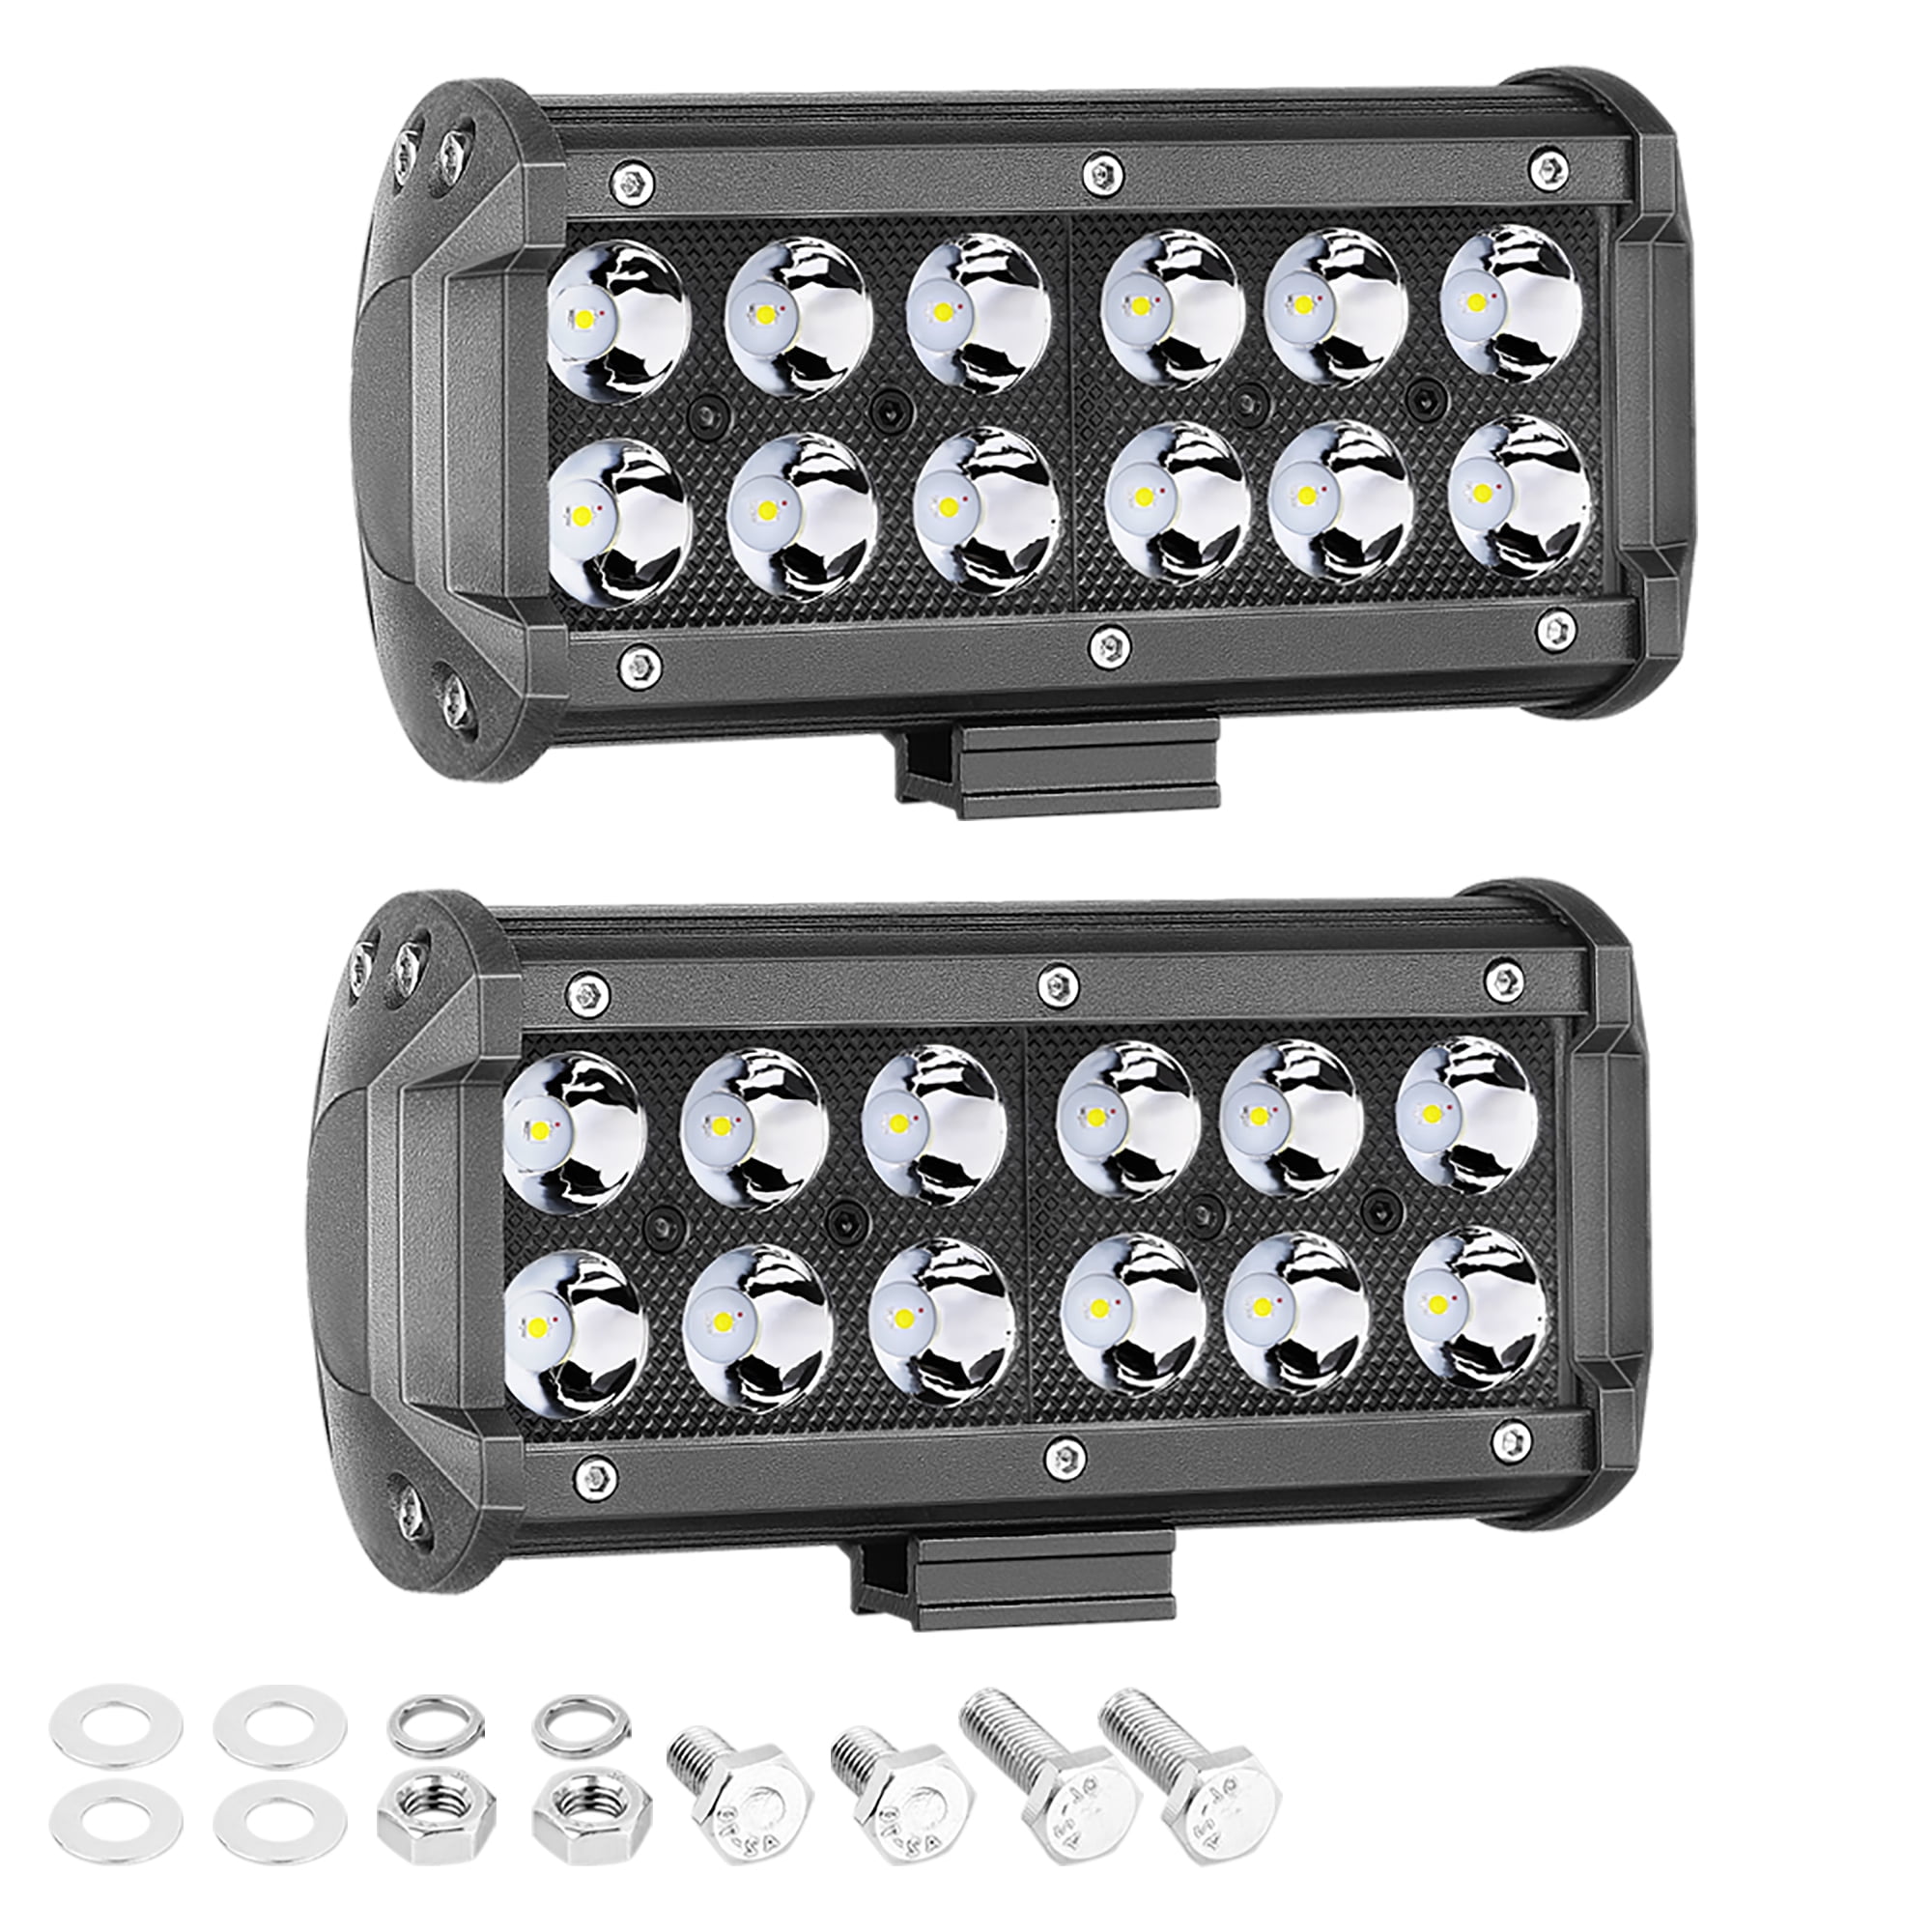 SAE Fog Lights SWATOW 4x4 2pcs 3 Square LED Cubes DOT Approved Driving Lights Work Light Fog Lamps for Truck Jeep SUV ATV Boat Motorcycle 2 Year Warranty 